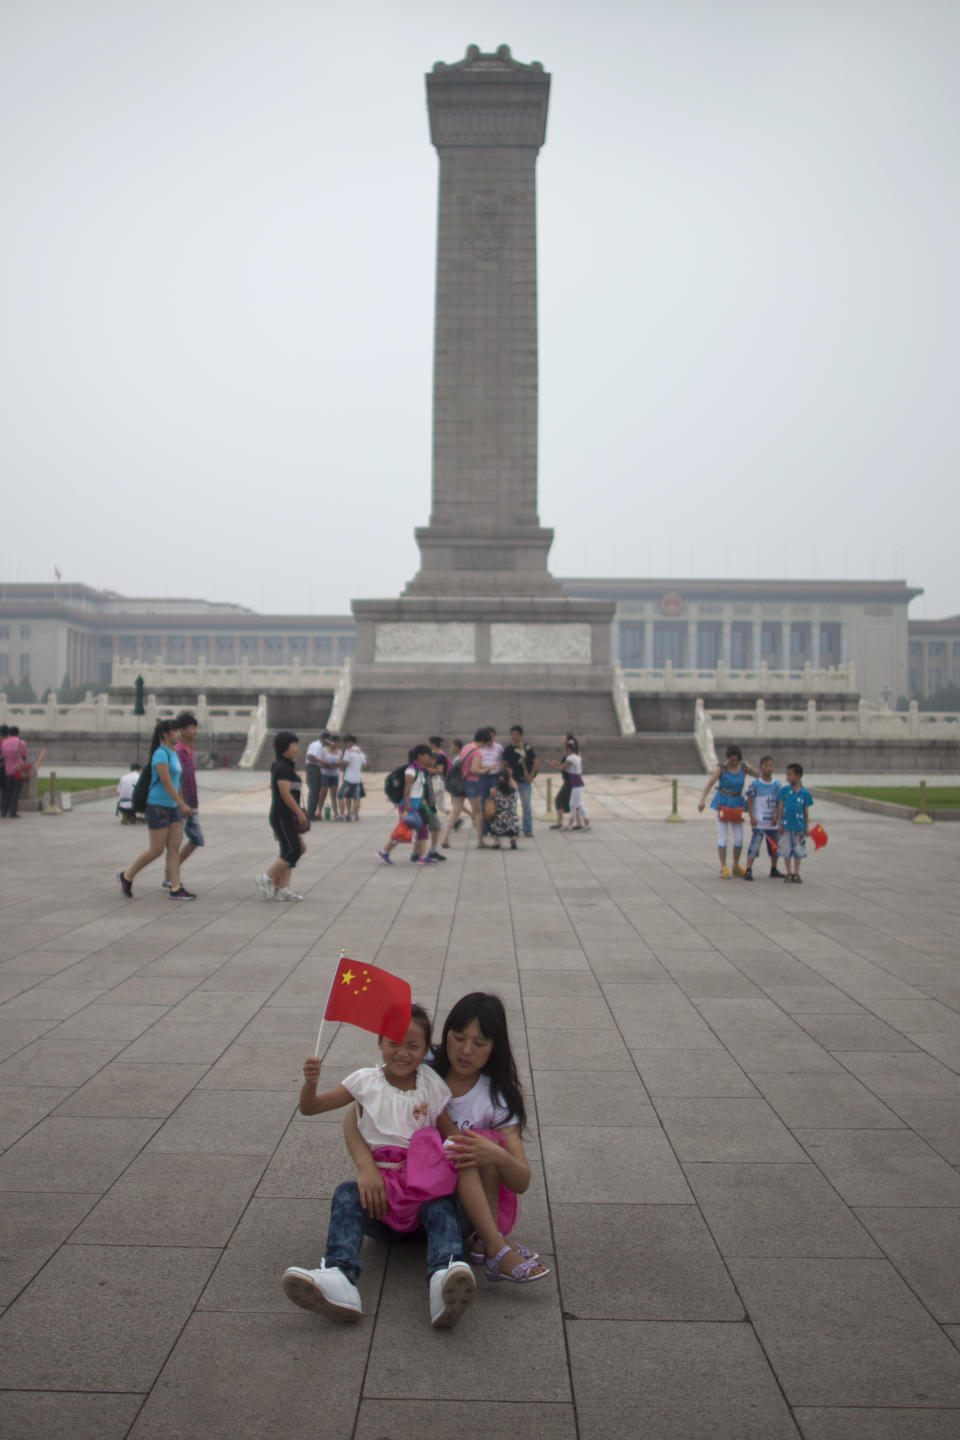 In this Monday, July 9, 2012 photo, a girl waves Chinese national flag while resting with her mom in front of the Monument to People's Heroes on the Tiananmen Square in Beijing, China. Tiananmen Square, the world's largest public square, is surrounded by buildings of political and cultural significance and is visited by thousands of tourists daily. (AP Photo/Alexander F. Yuan)